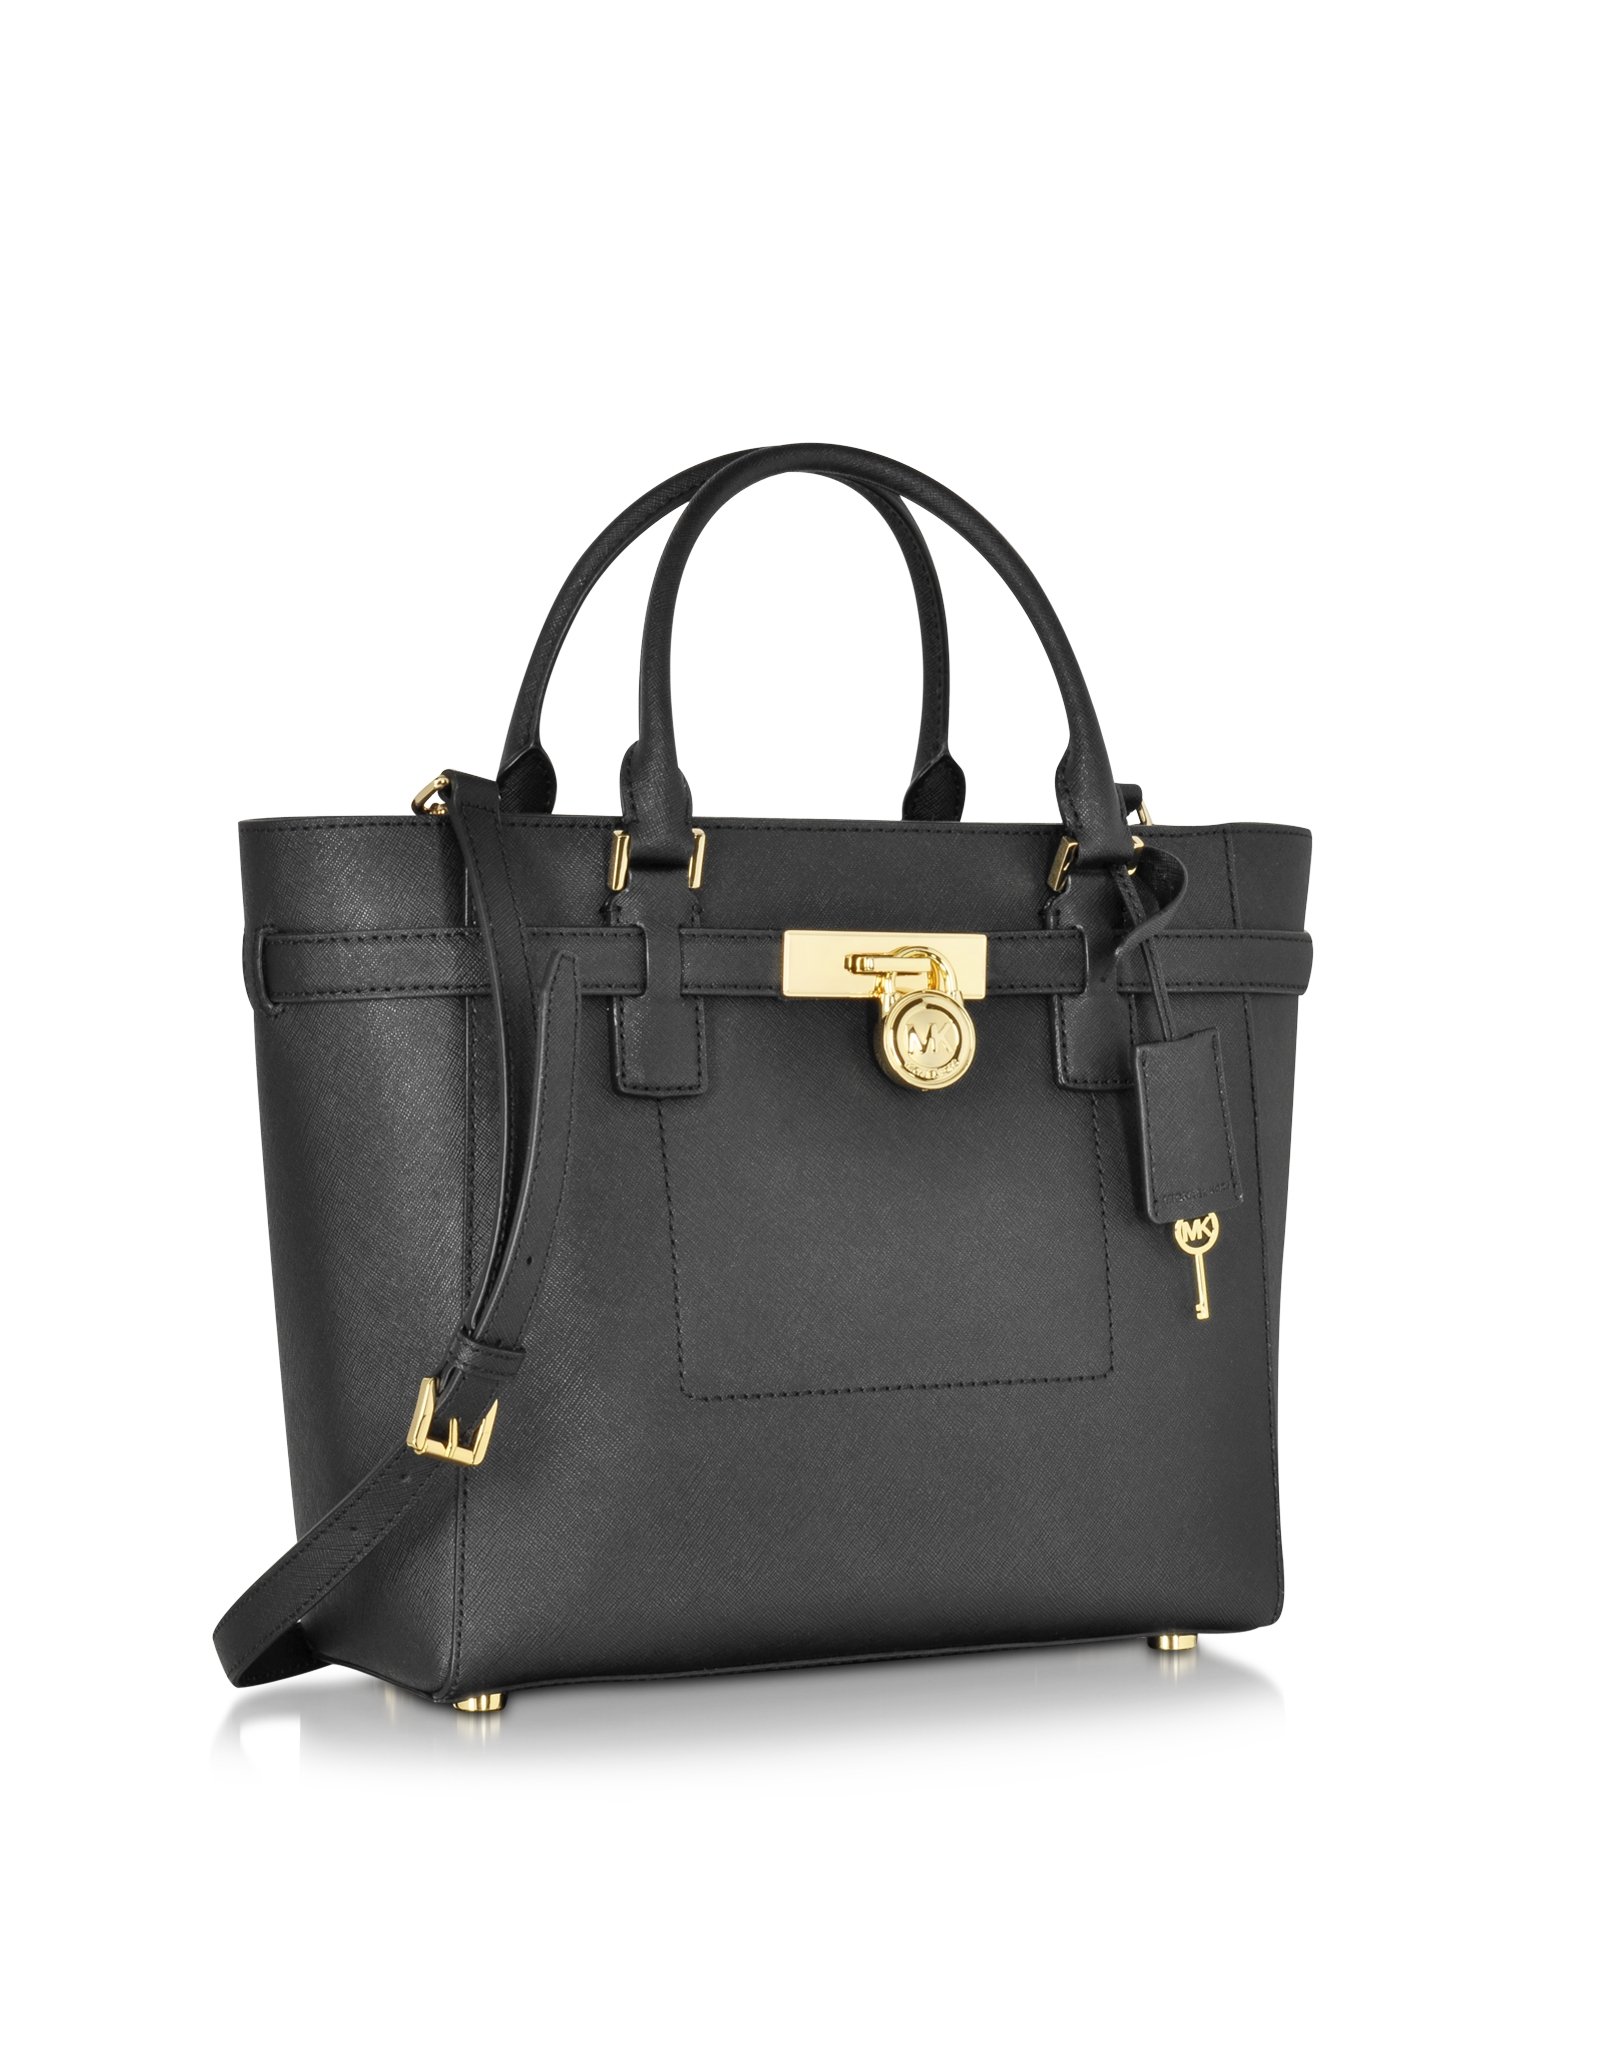 Lyst - Michael Kors Hamilton Saffiano Leather Large Top Zip Tote Bag in Black